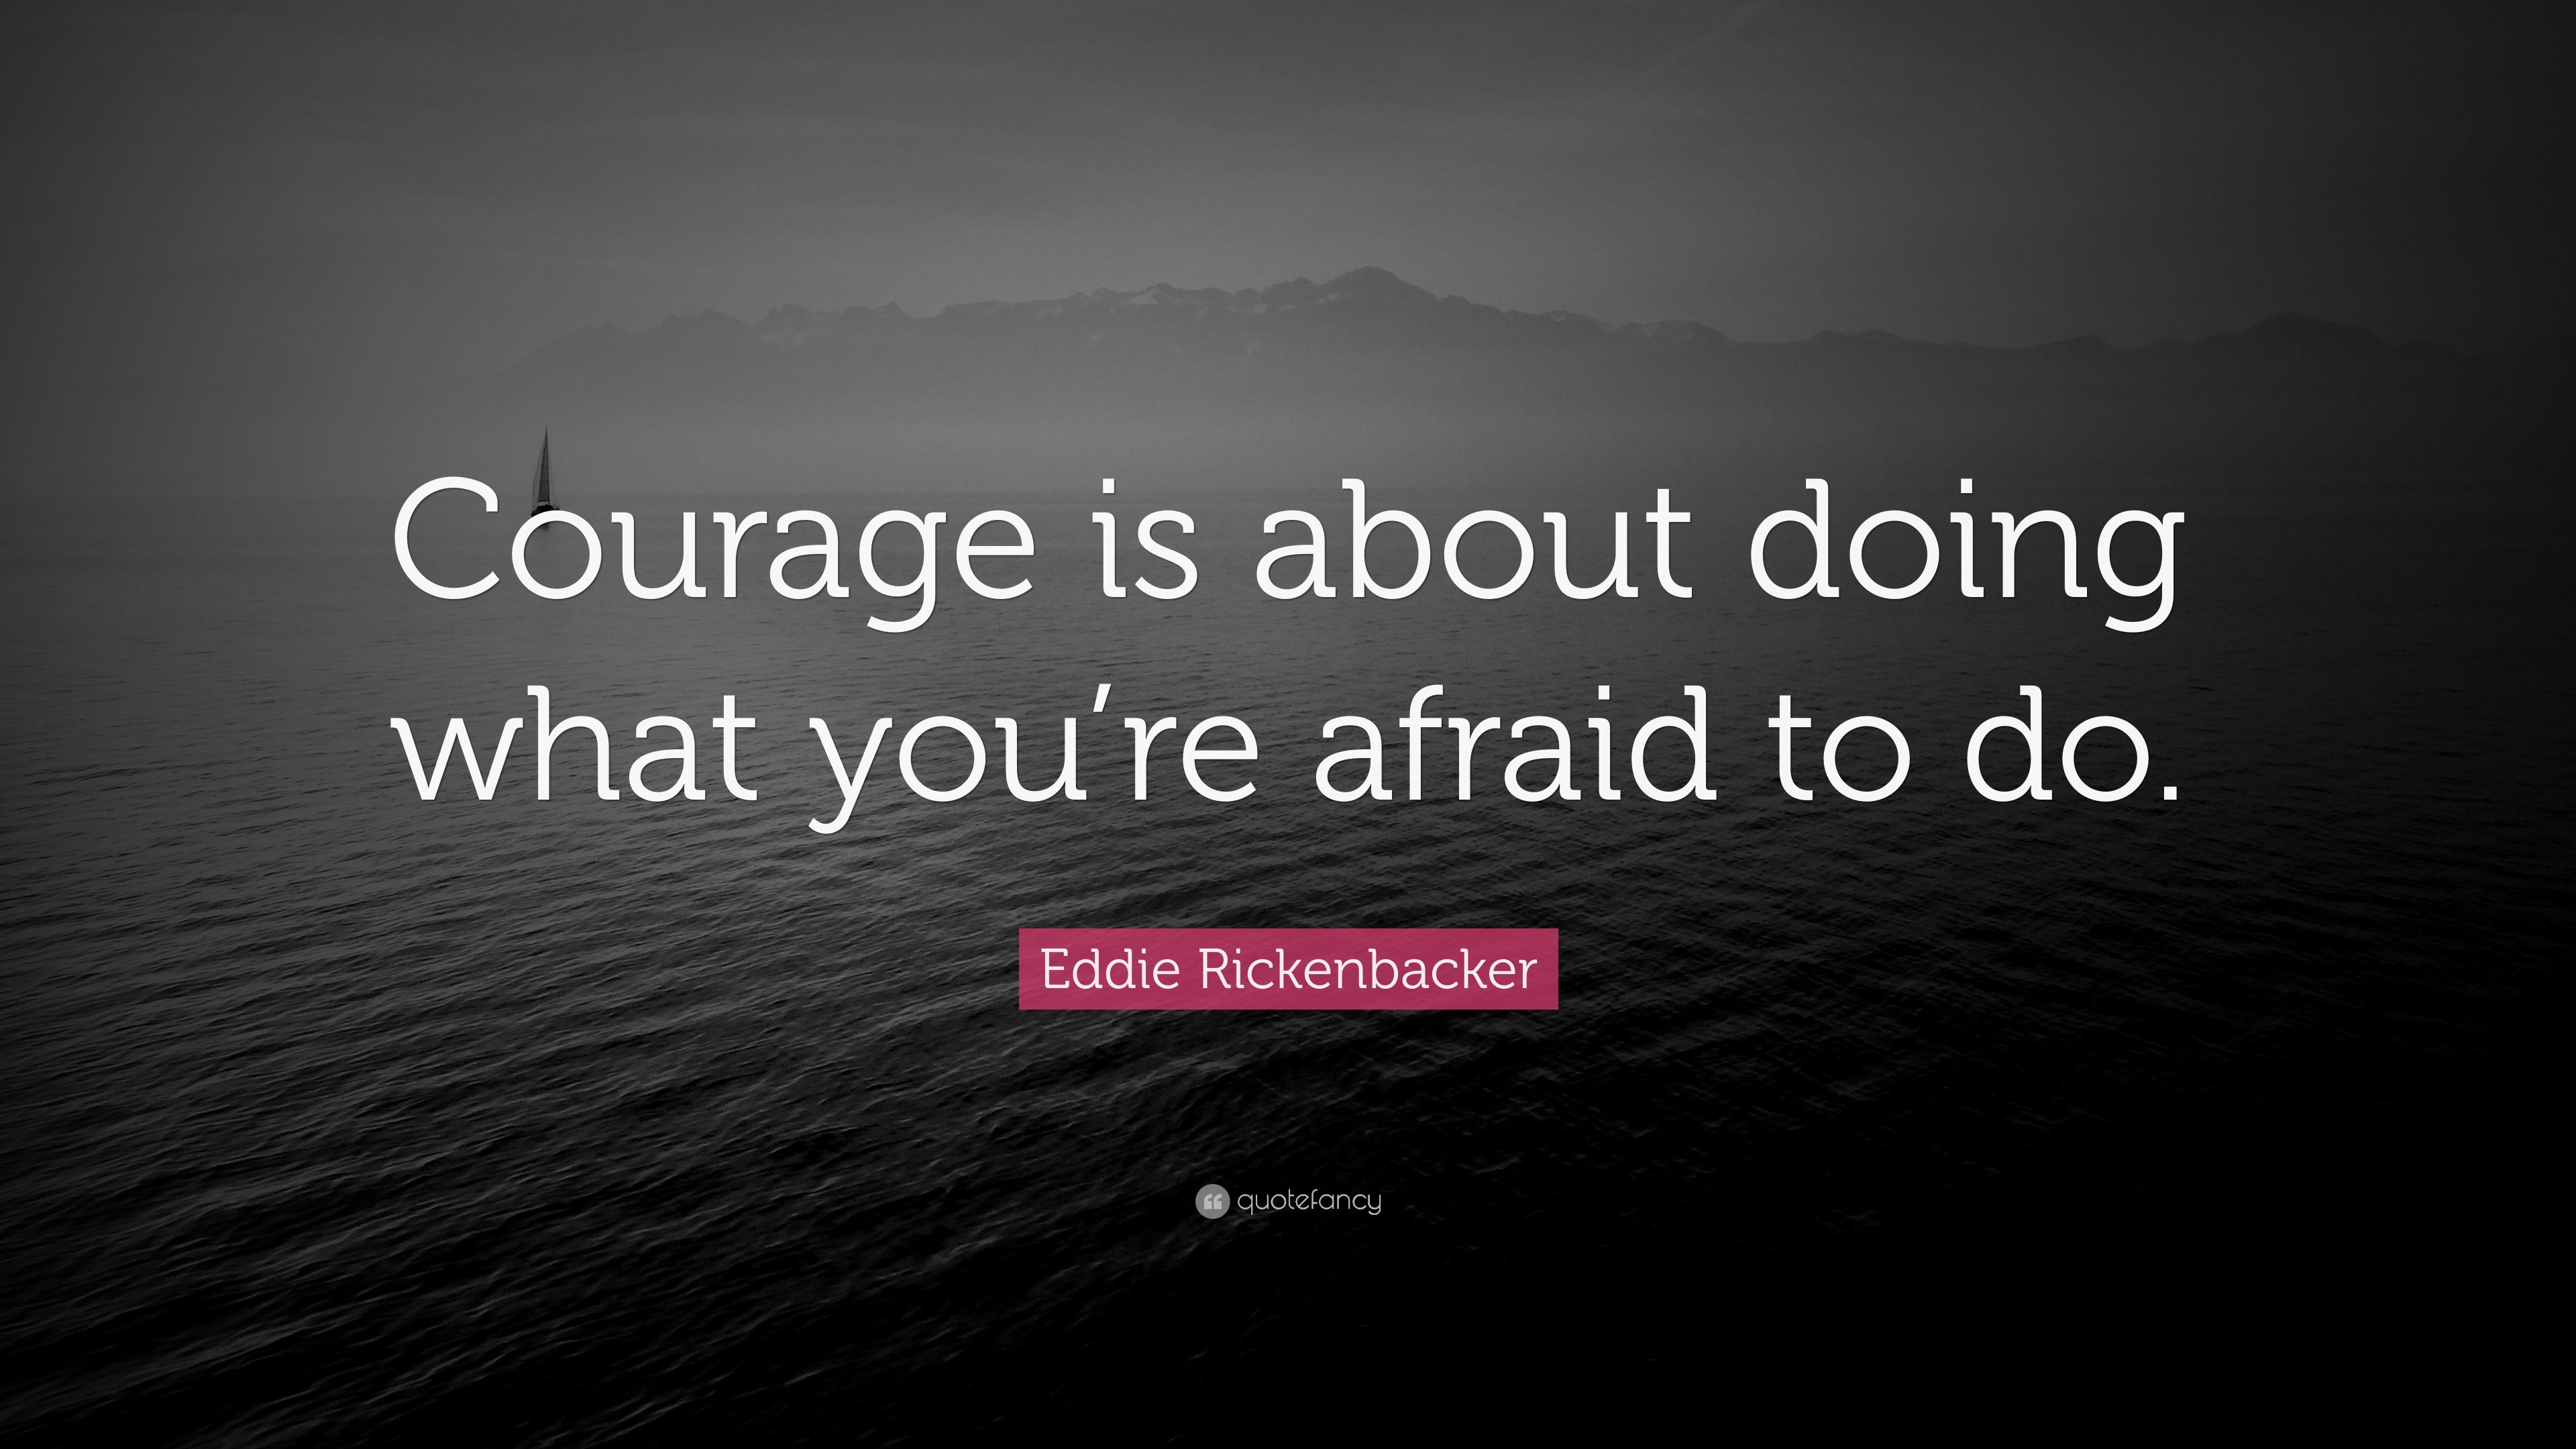 Eddie Rickenbacker Quote: “Courage is about doing what you're afraid to do.” (7 wallpaper)